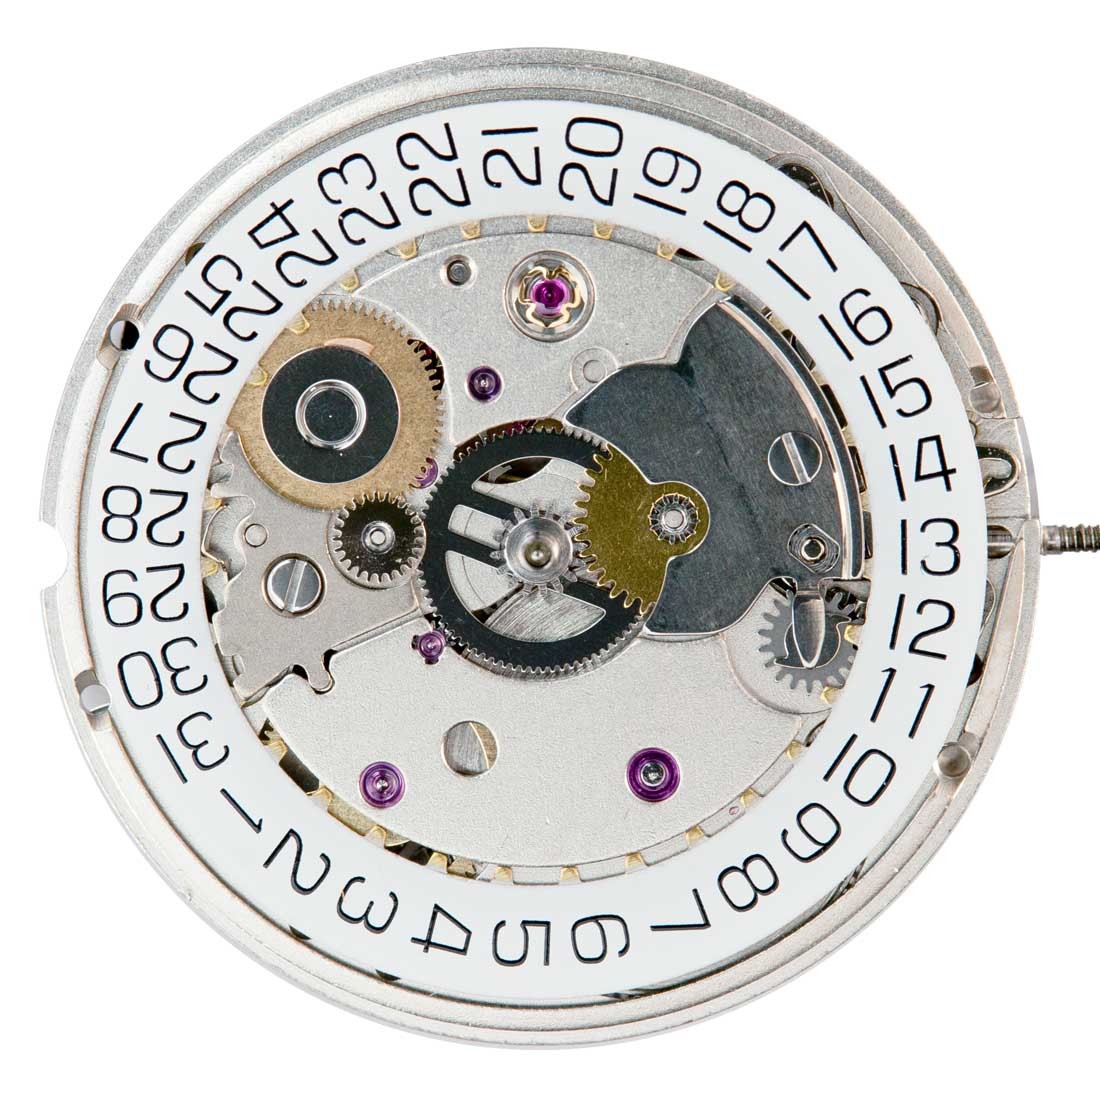 Sellita SW200-1 3 Hands Swiss Made Automatic Movement Ht. 6.52MM